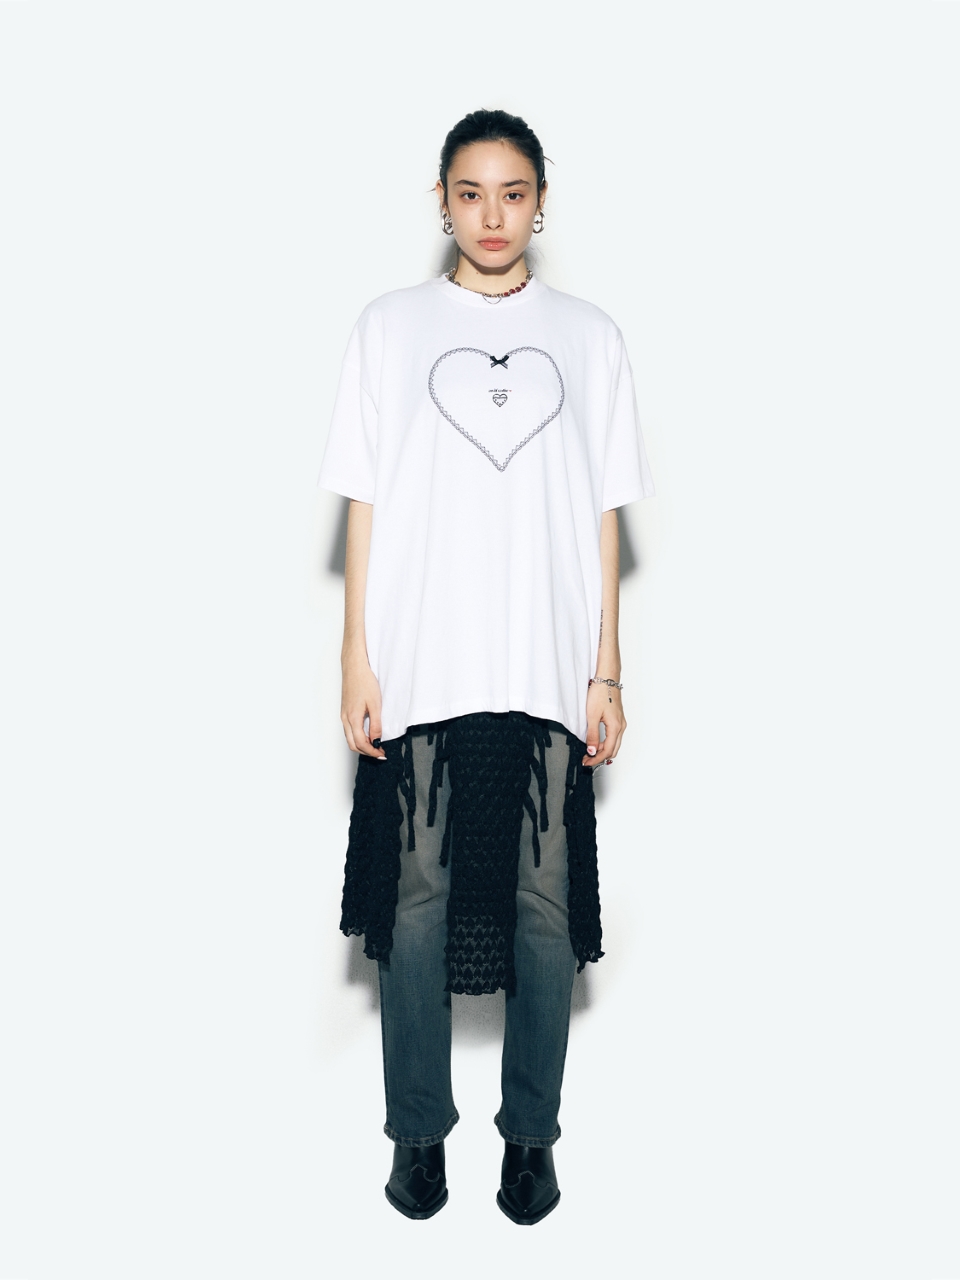 LACE HEART OVERSIZED T-SHIRT WHITE - 에즈이프캘리(asifCALIE)